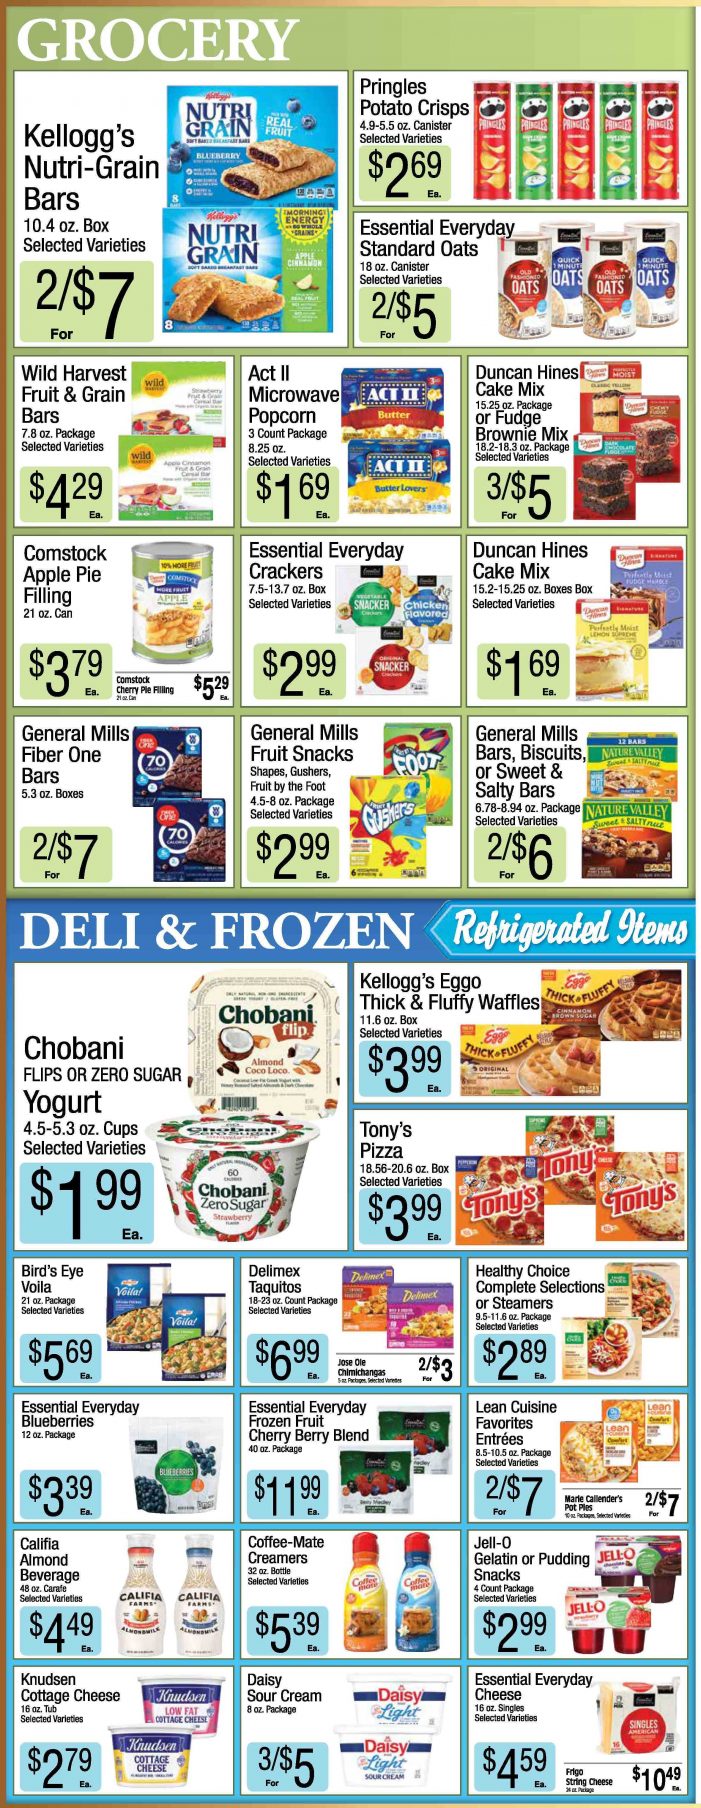 Sender’s Market Weekly Ad & Grocery Specials Through January 23rd! Shop Local & Save!!